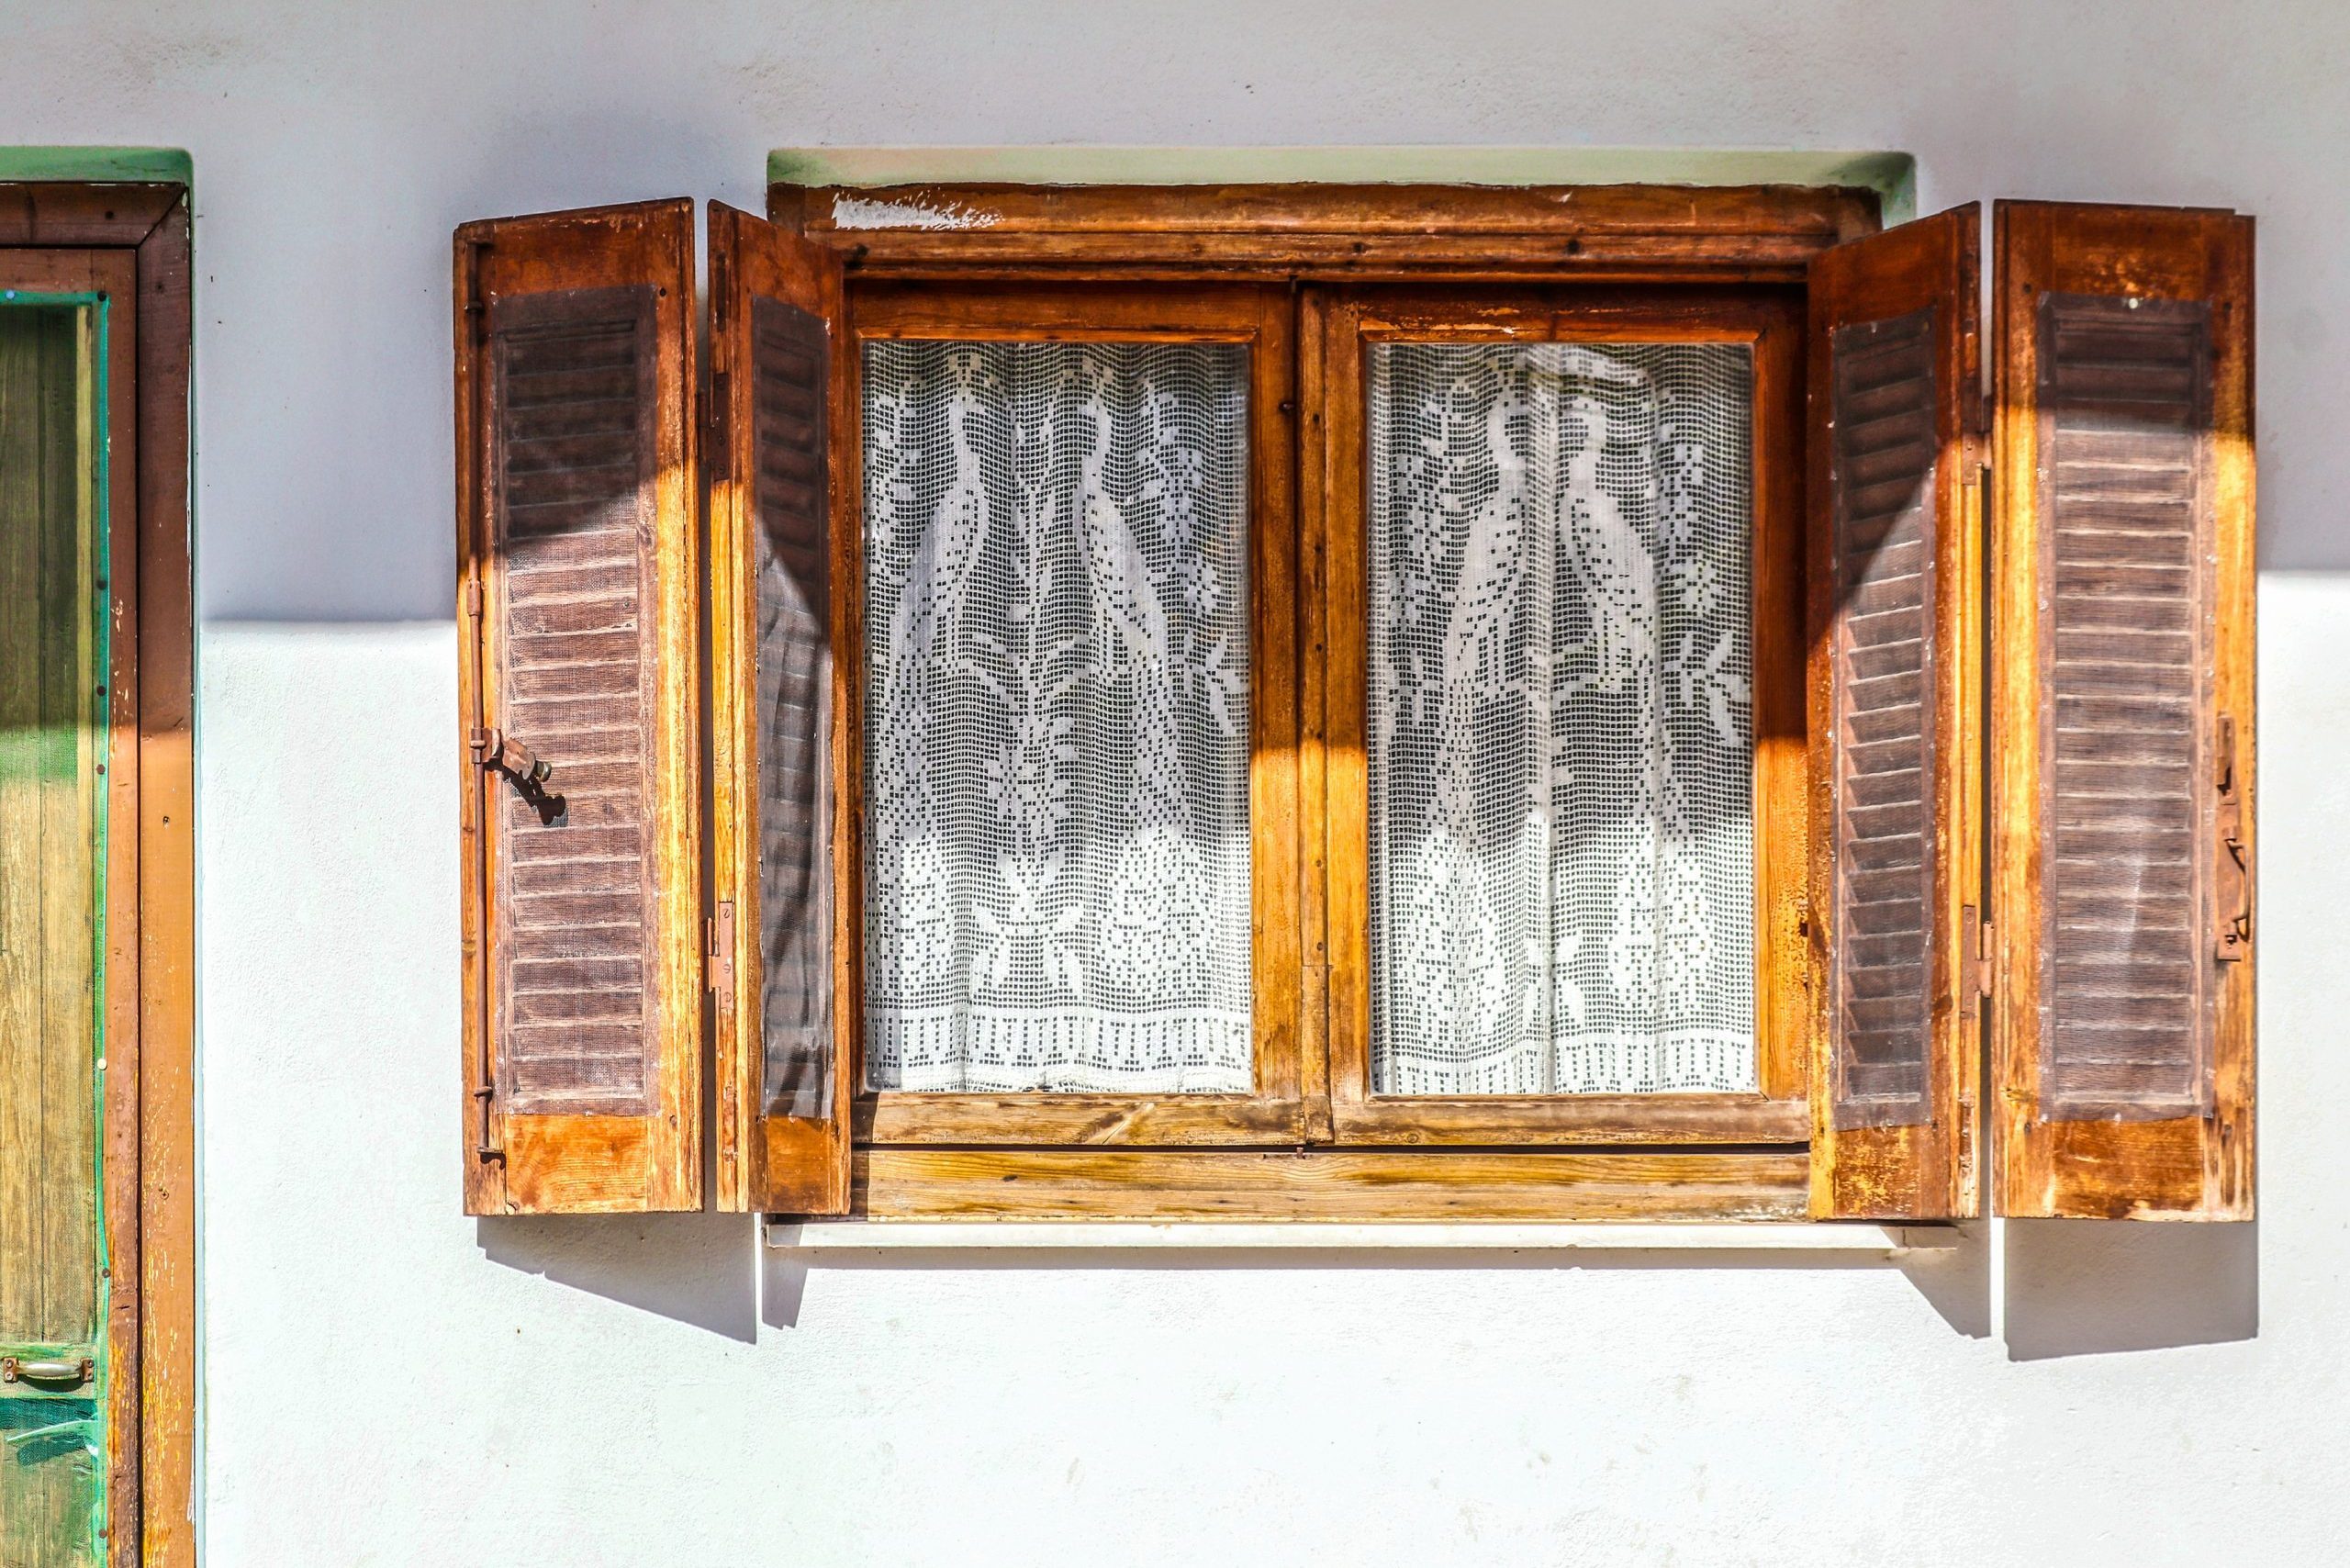 Old wooden window with open shutters on white stucco wall with insect netting tacked on and white lace peacock curtains - part of door visible - golden hour sun and shade